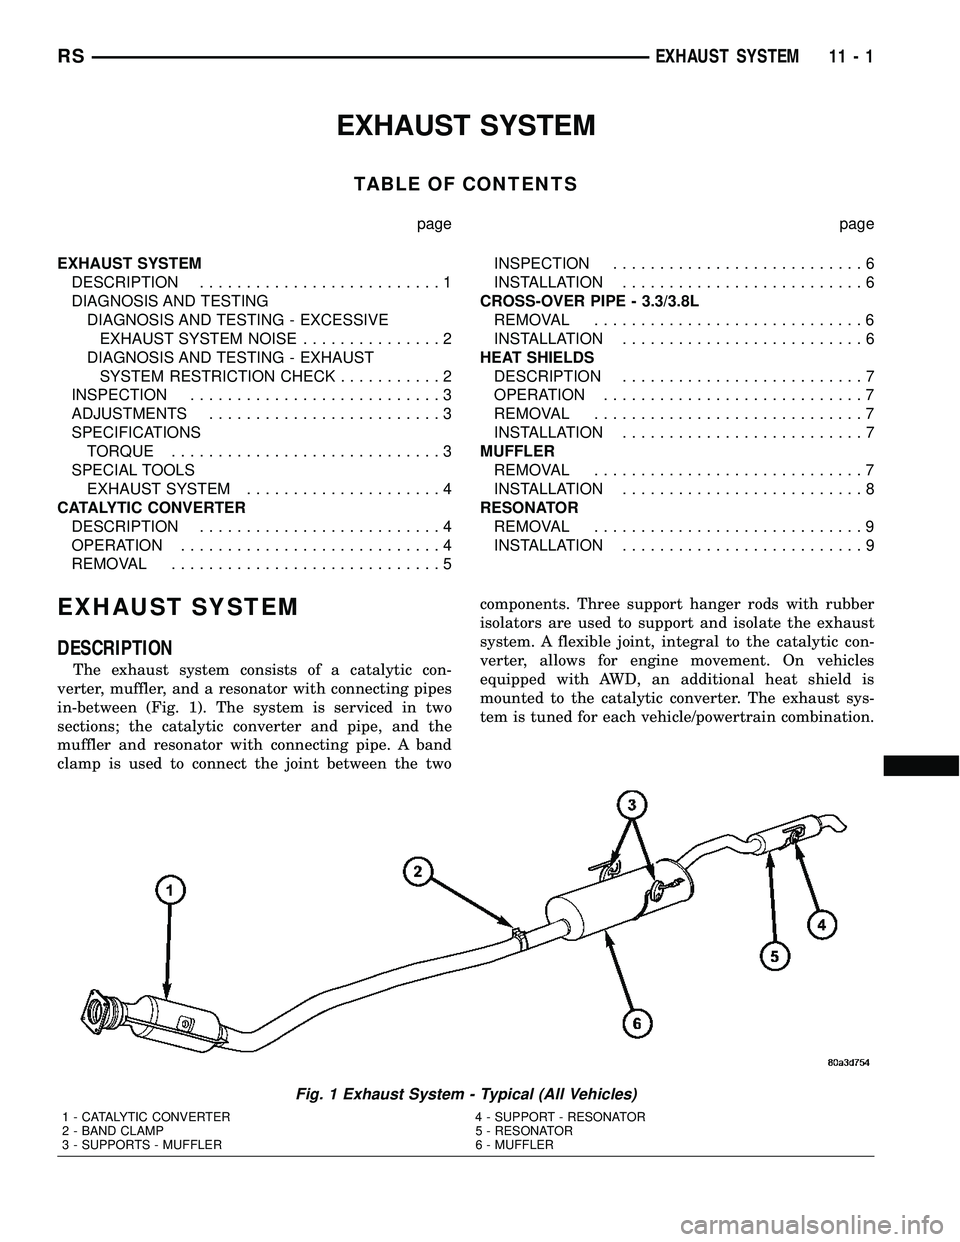 CHRYSLER VOYAGER 2005  Service Manual EXHAUST SYSTEM
TABLE OF CONTENTS
page page
EXHAUST SYSTEM
DESCRIPTION..........................1
DIAGNOSIS AND TESTING
DIAGNOSIS AND TESTING - EXCESSIVE
EXHAUST SYSTEM NOISE...............2
DIAGNOSIS 